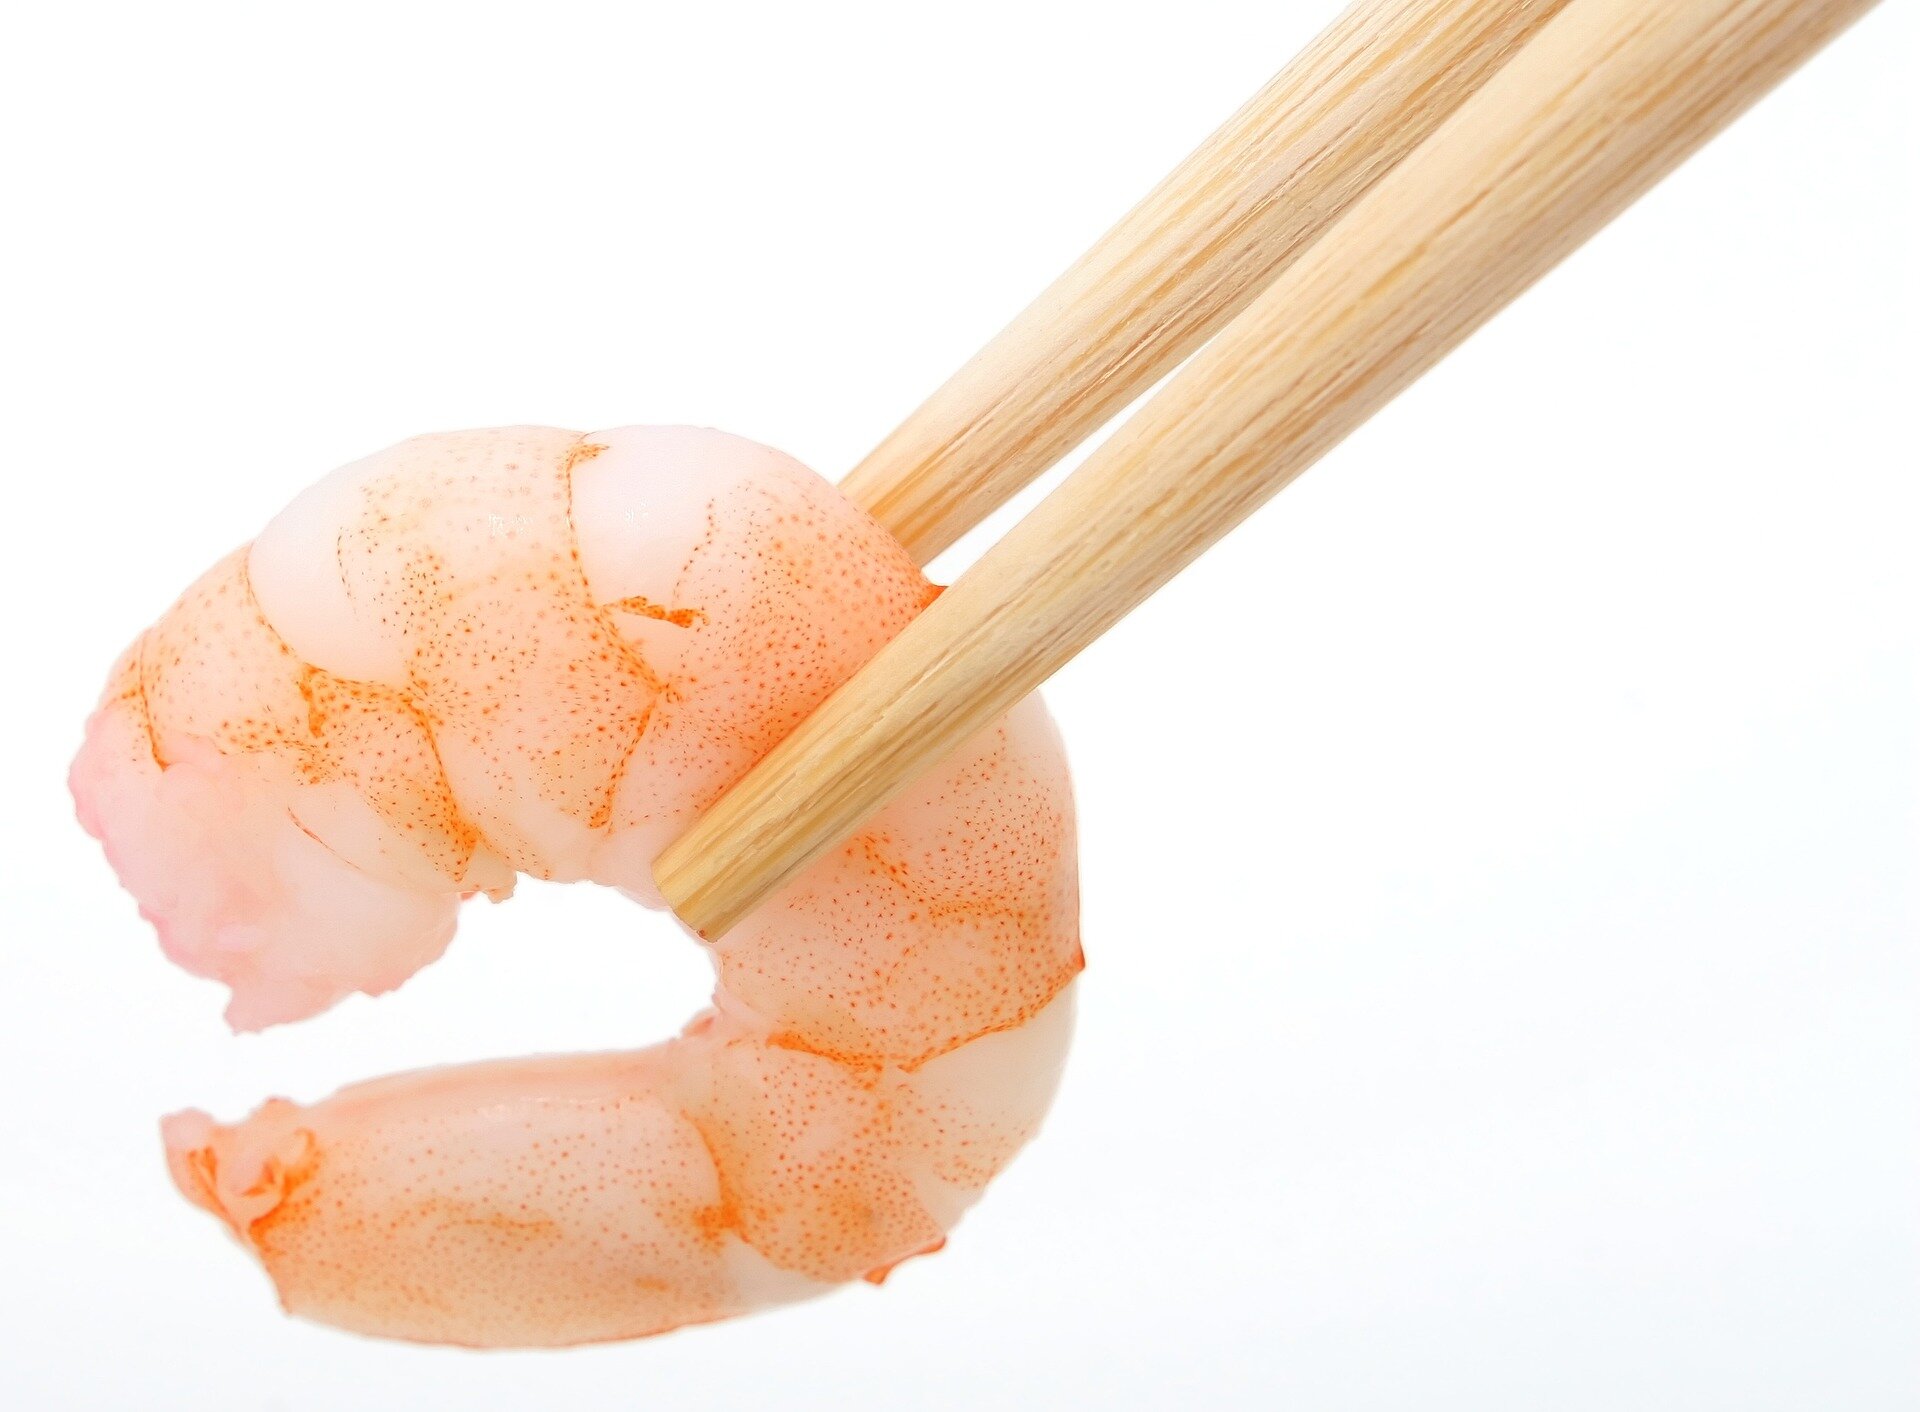 Using pressure and steam to create shrimp with fewer allergens